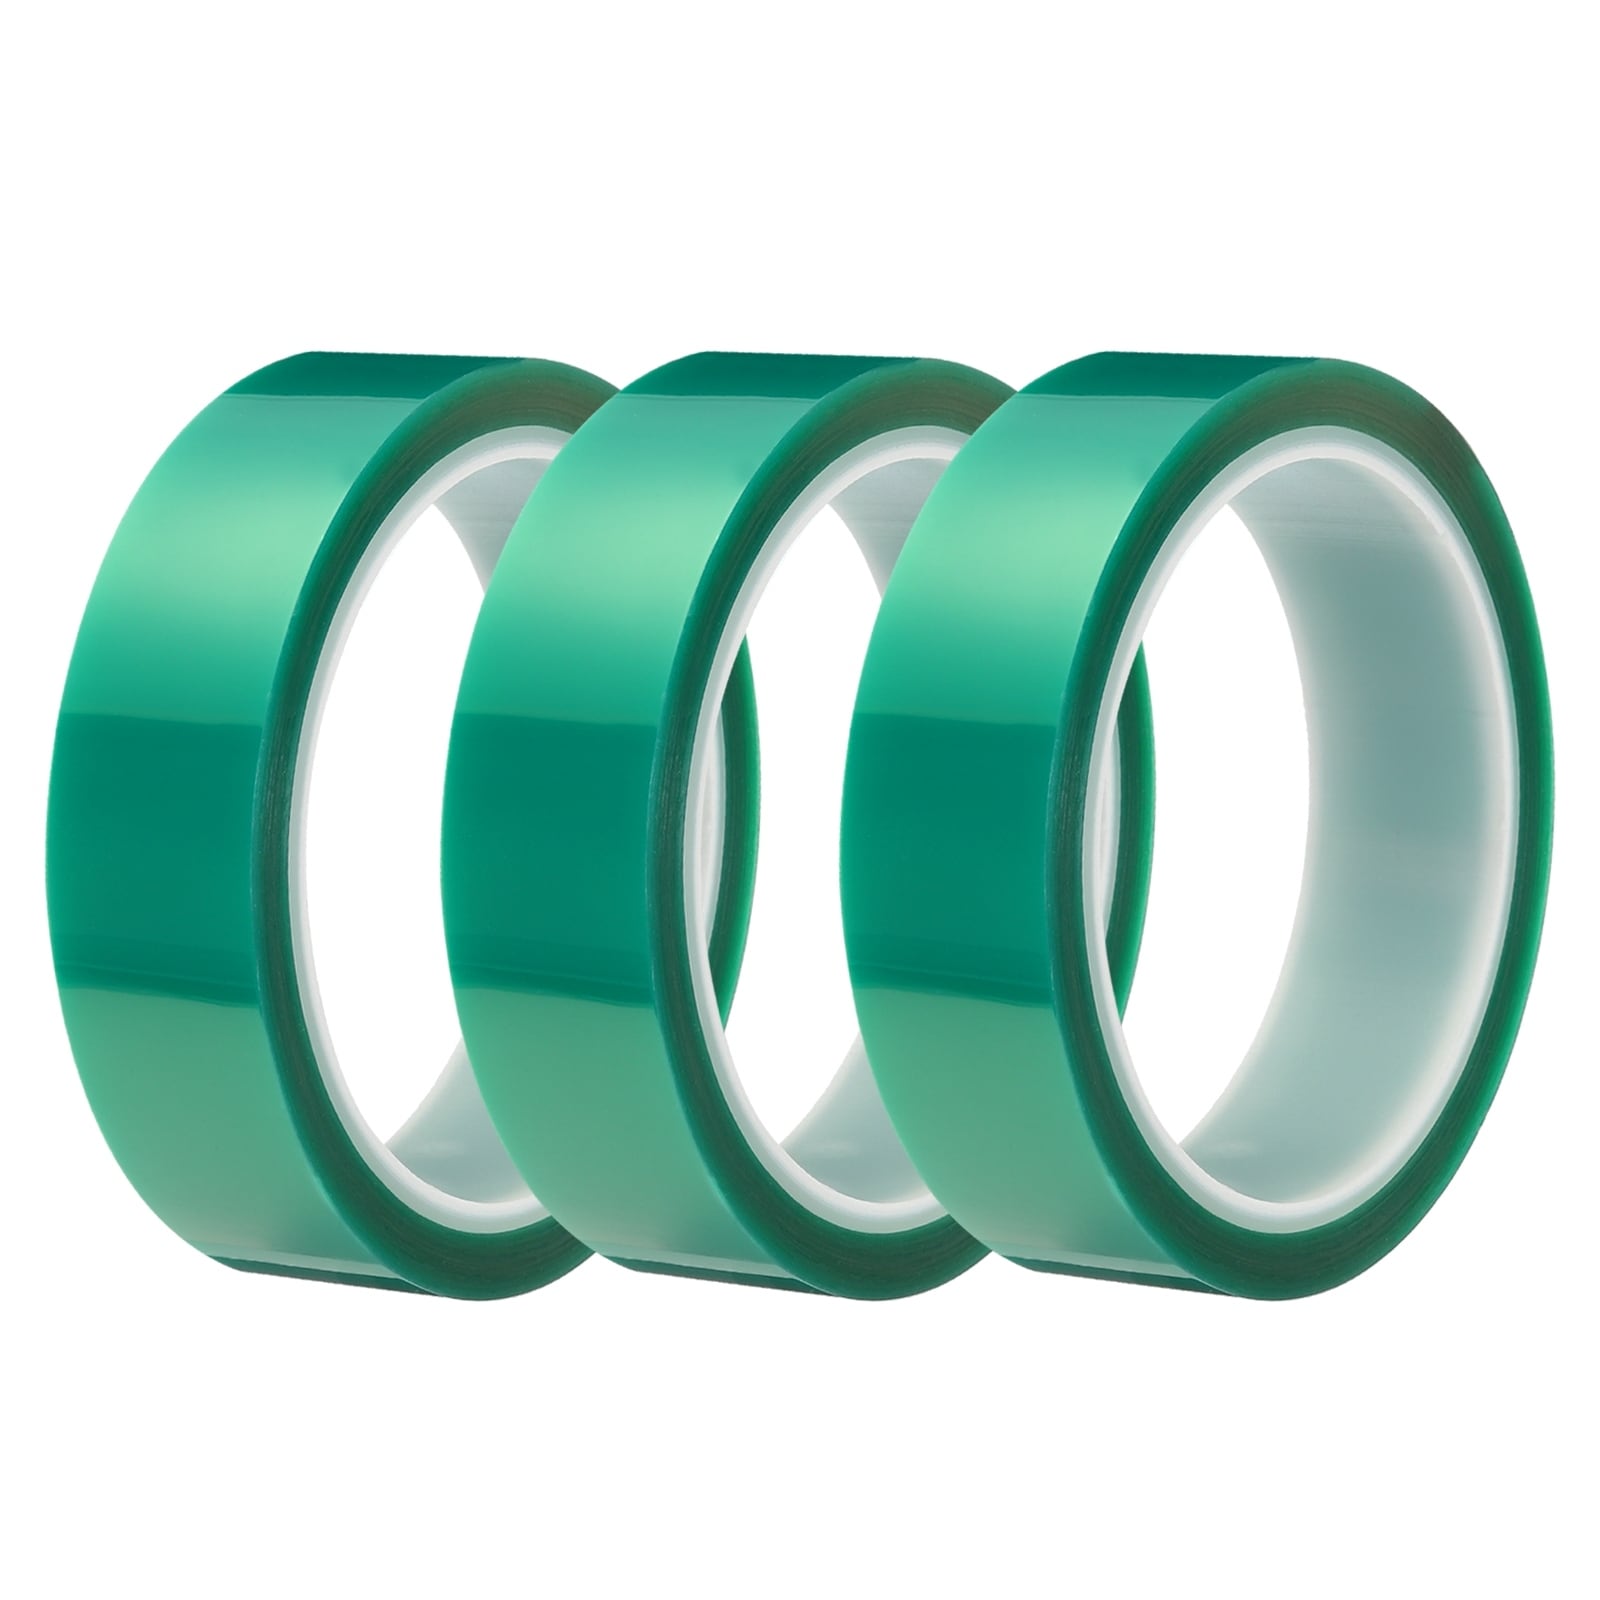 Resin Tape Silicone Adhesive Tape for Epoxy Resin,0.98 Inch Wide 108FT  Long,3PCS - Green - Bed Bath & Beyond - 39178364